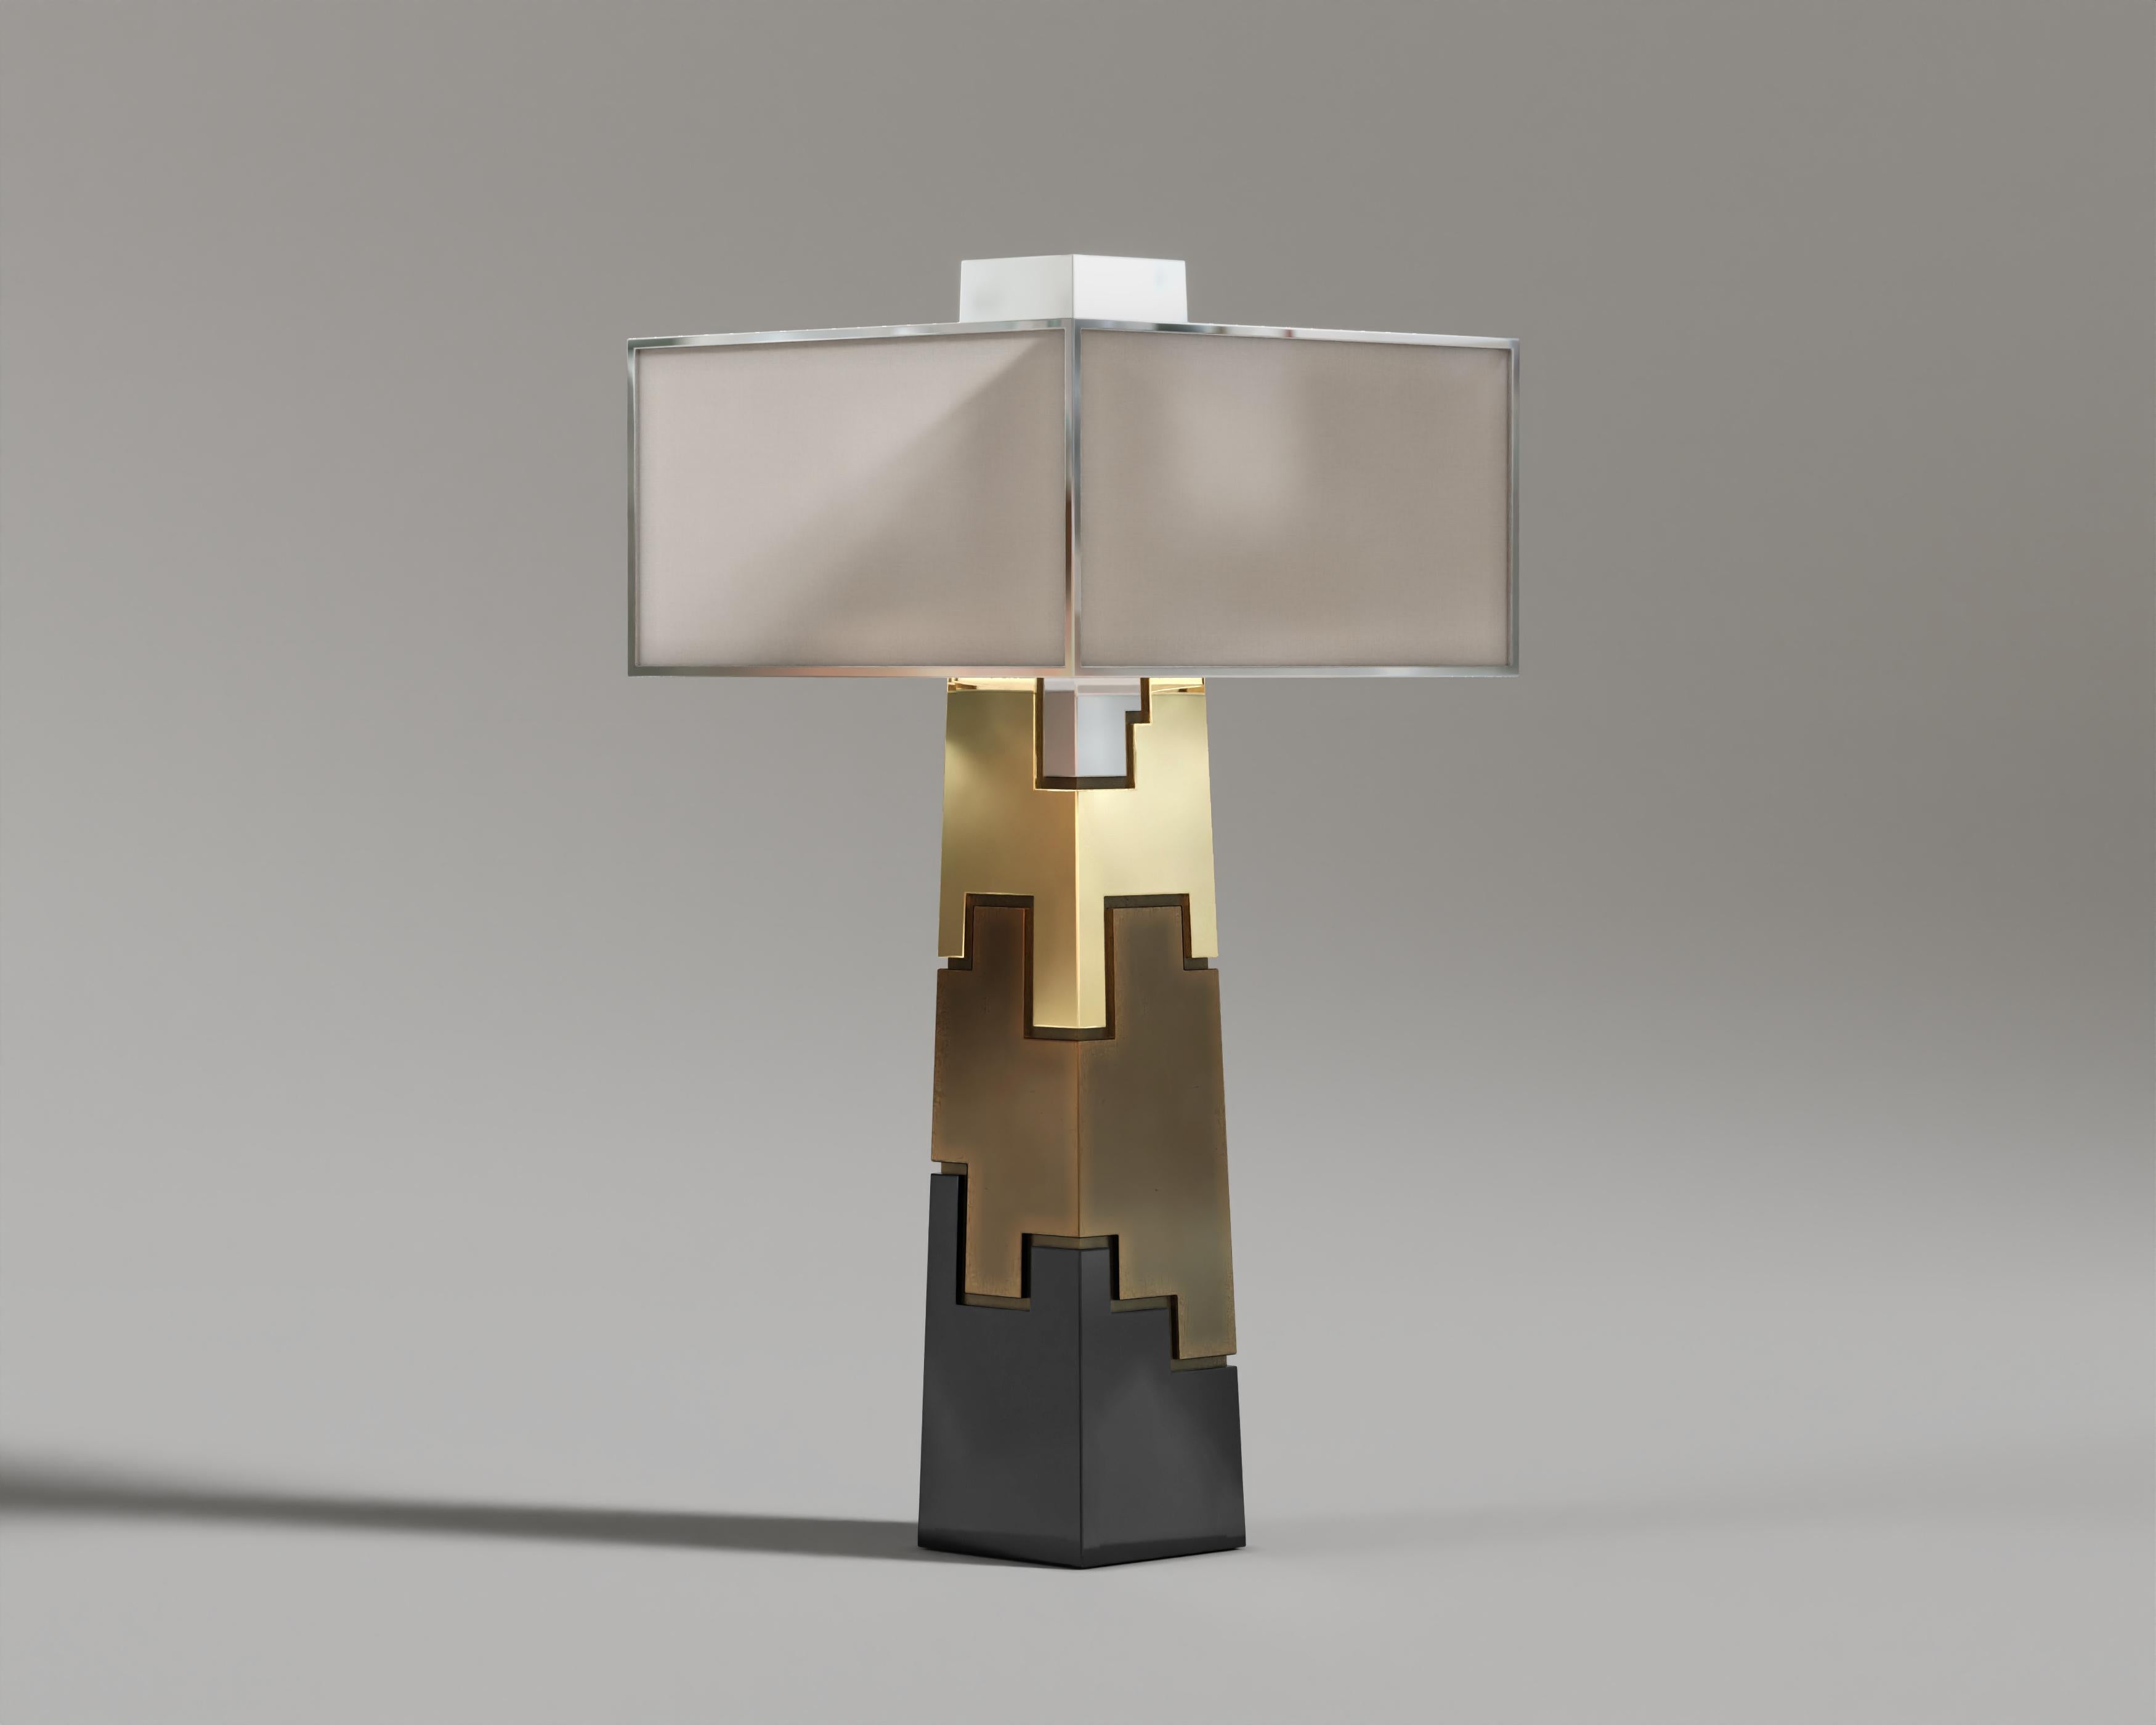 Fragmin Table Lamp

Fragmin Table Lamp, a mesmerizing piece that is made from top of the range metals – black lacquer, polished bronze, patine bronze, and stainless steel layers, is modeled like a fashionable Lego block.

The rectangular lampshade